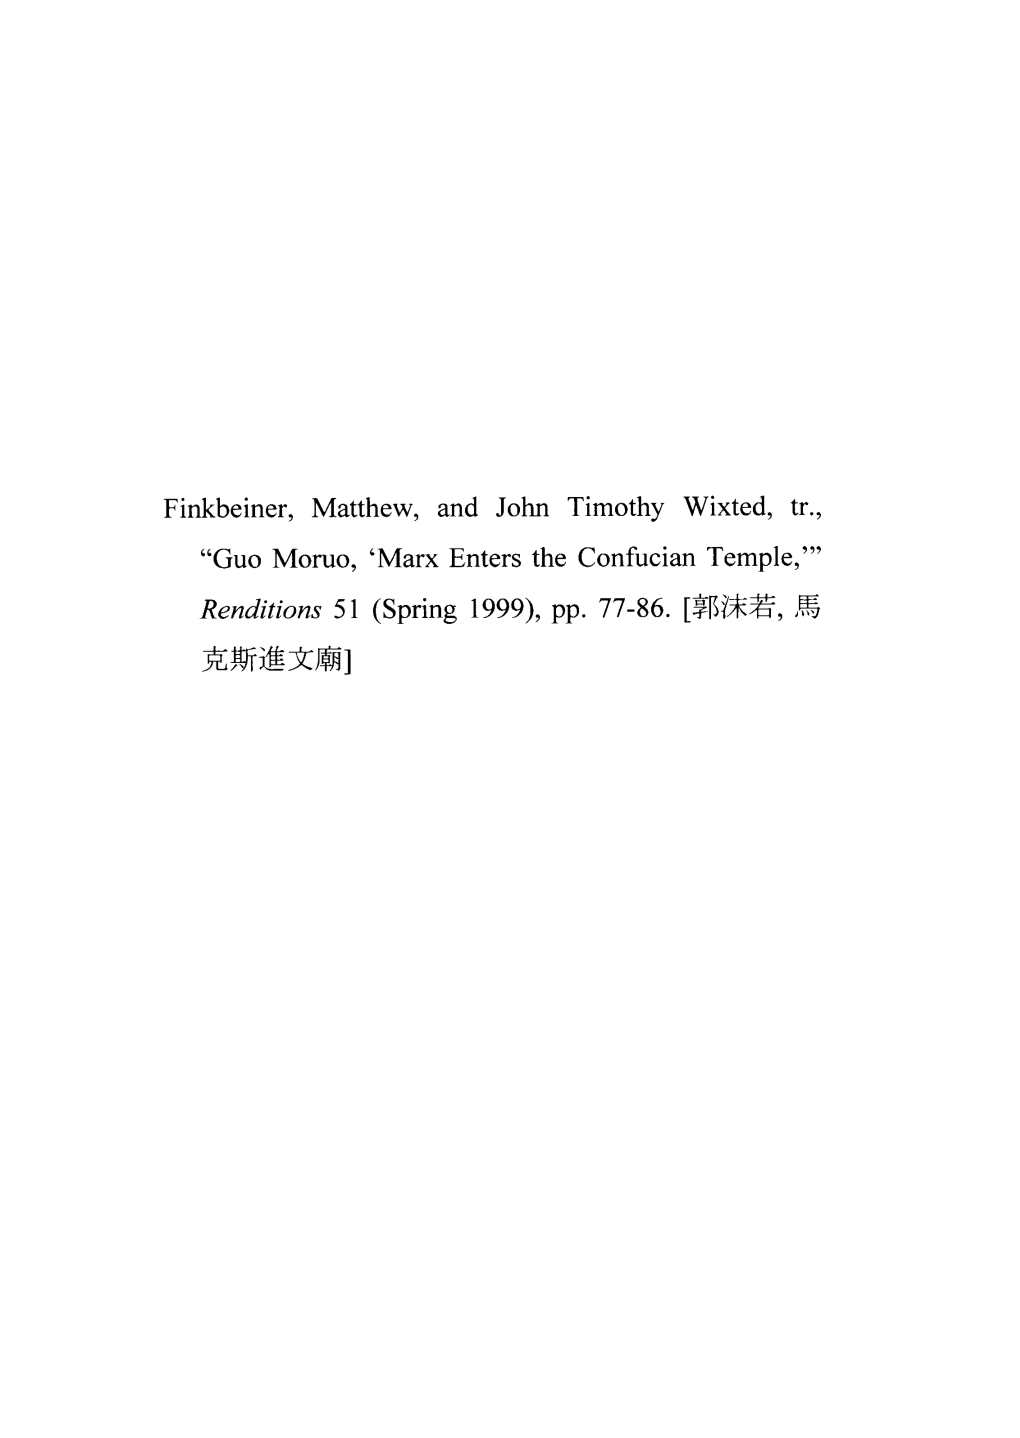 "Guo Moruo, 'Marx Enters the Confucian Temple,'" Renditions 51 (Spring 1999), Pp